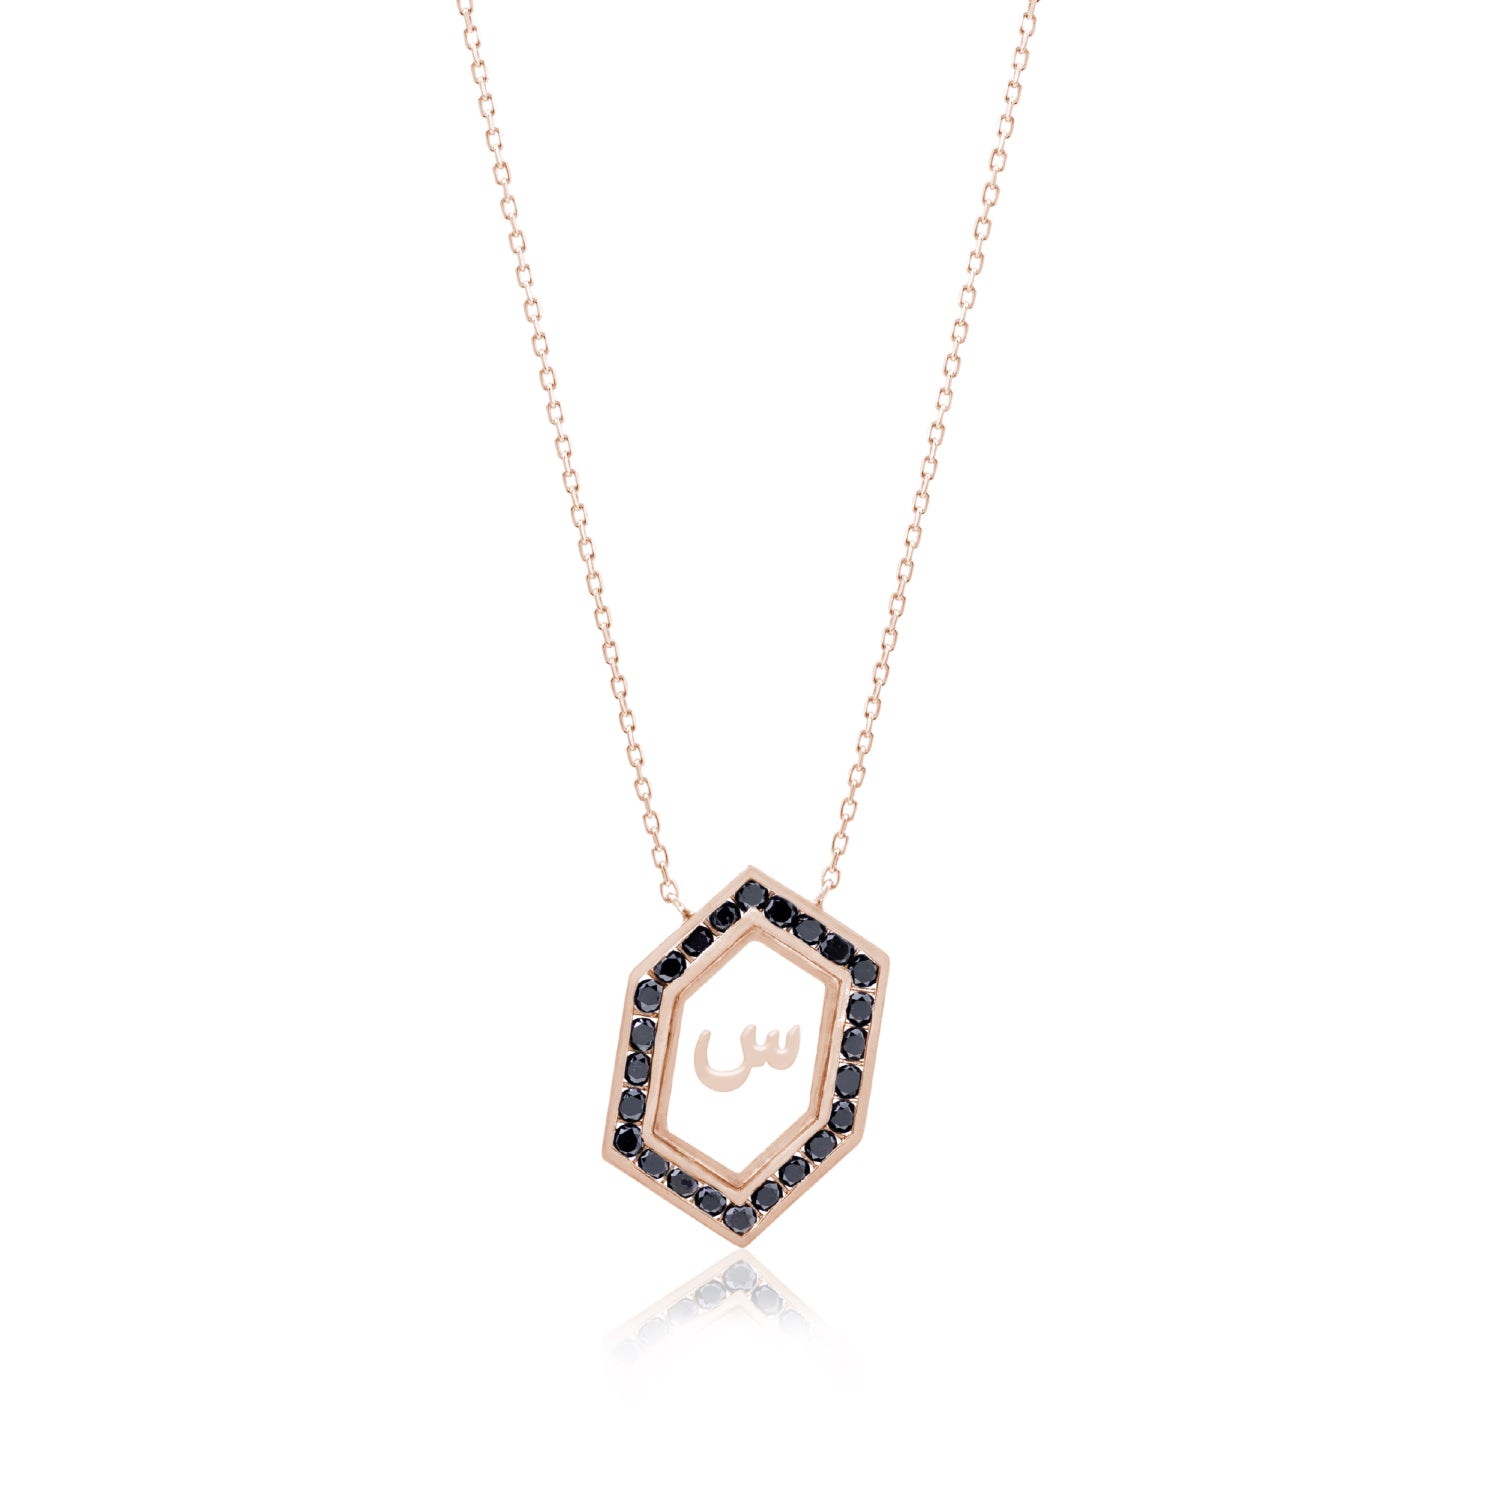 Qamoos 1.0 Letter س Black Diamond Necklace in Rose Gold